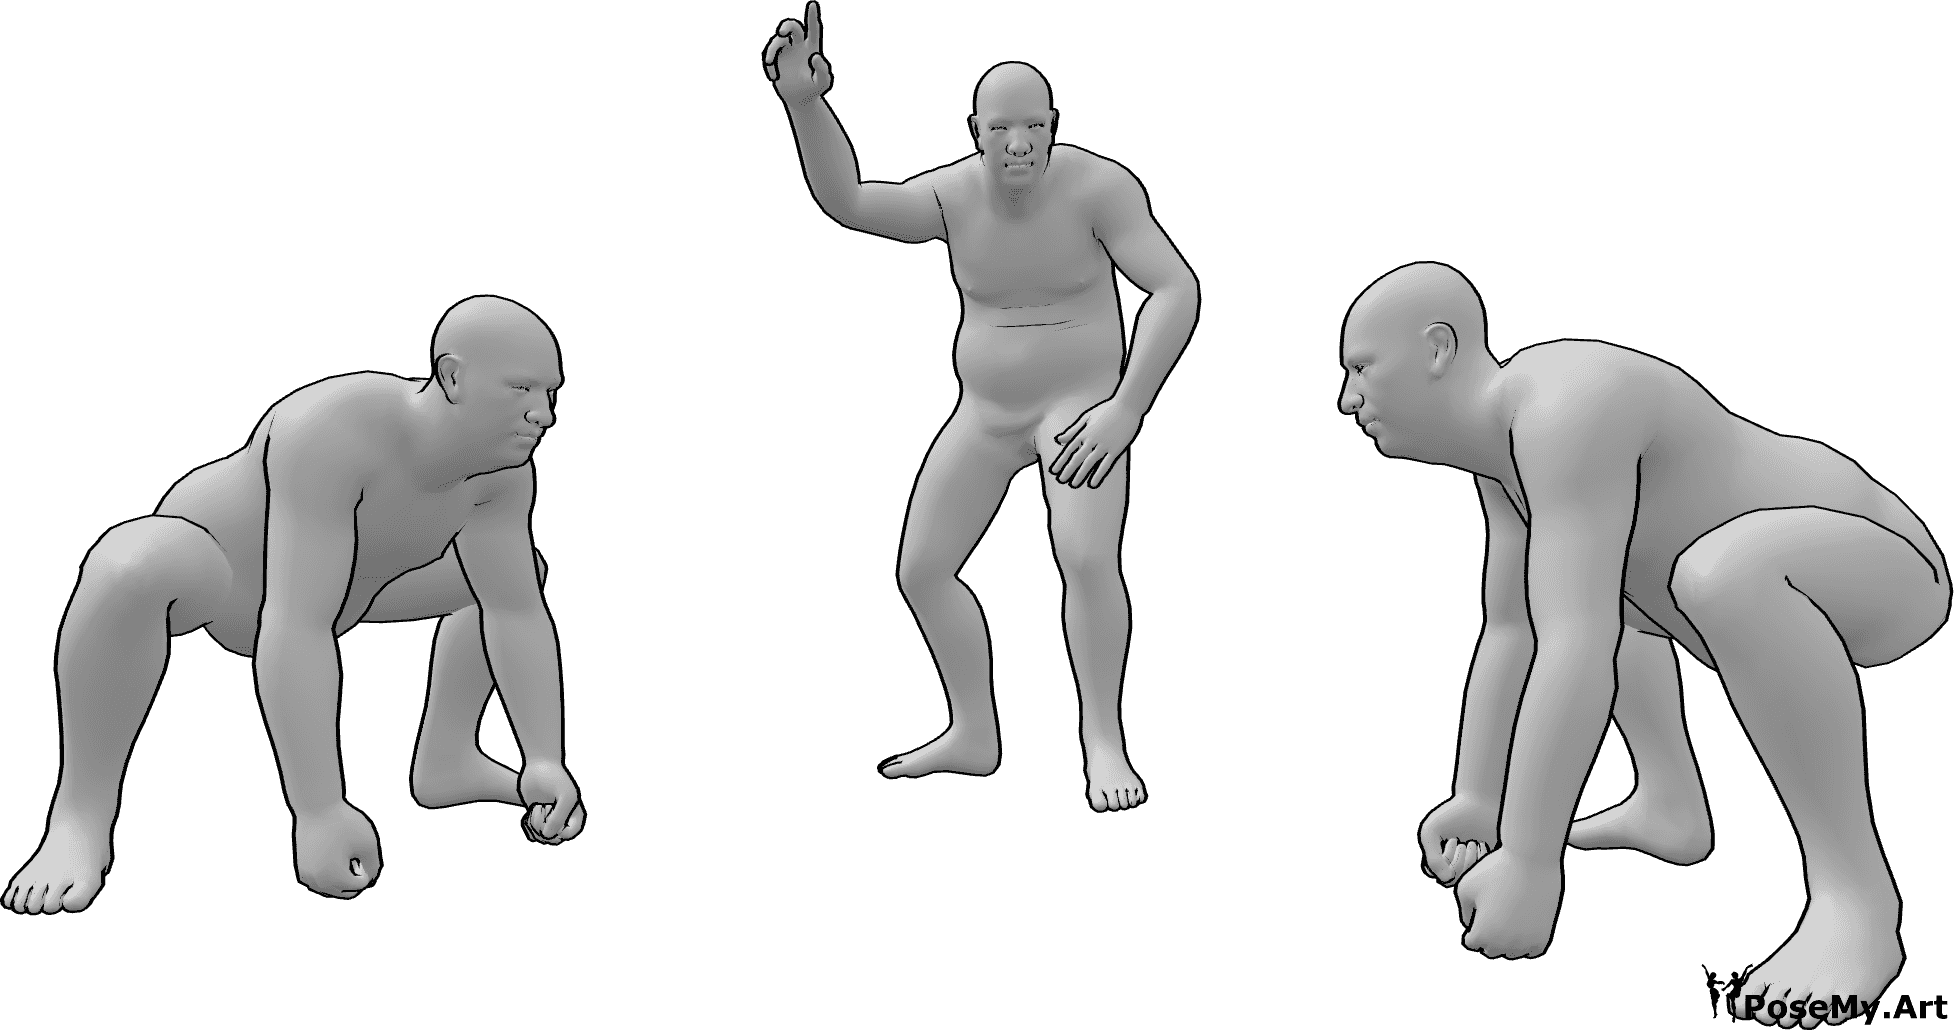 Pose Reference- Sumo crouching fists pose - Wrestlers are crouching with fists on the floor, before the referee signals to start wrestling